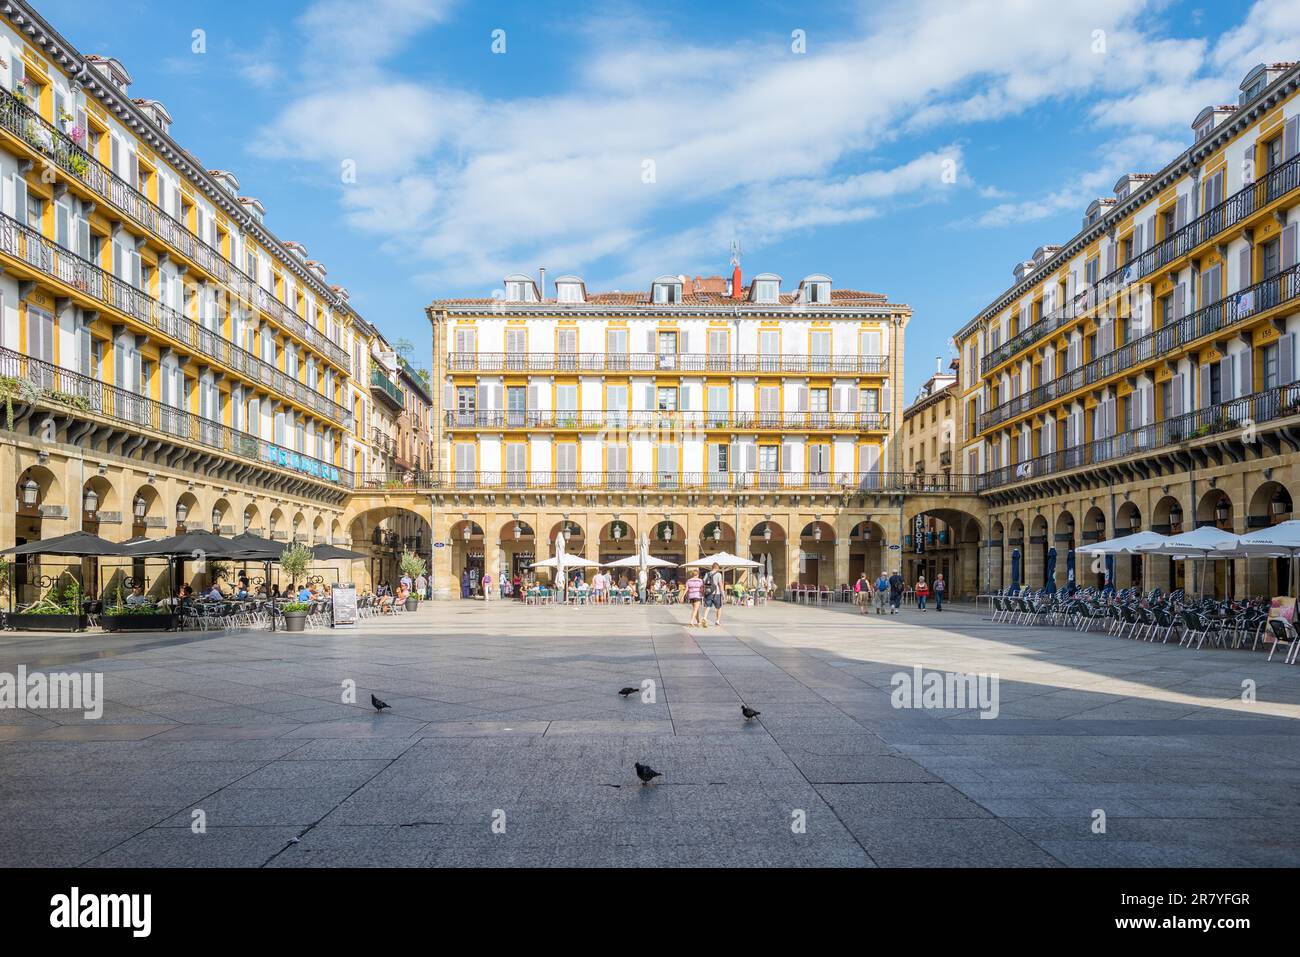 Historical buildings around the Constitution square in Donostia, The square, Spanish, Plaza de la Constitution is also a former bullfight ring Stock Photo